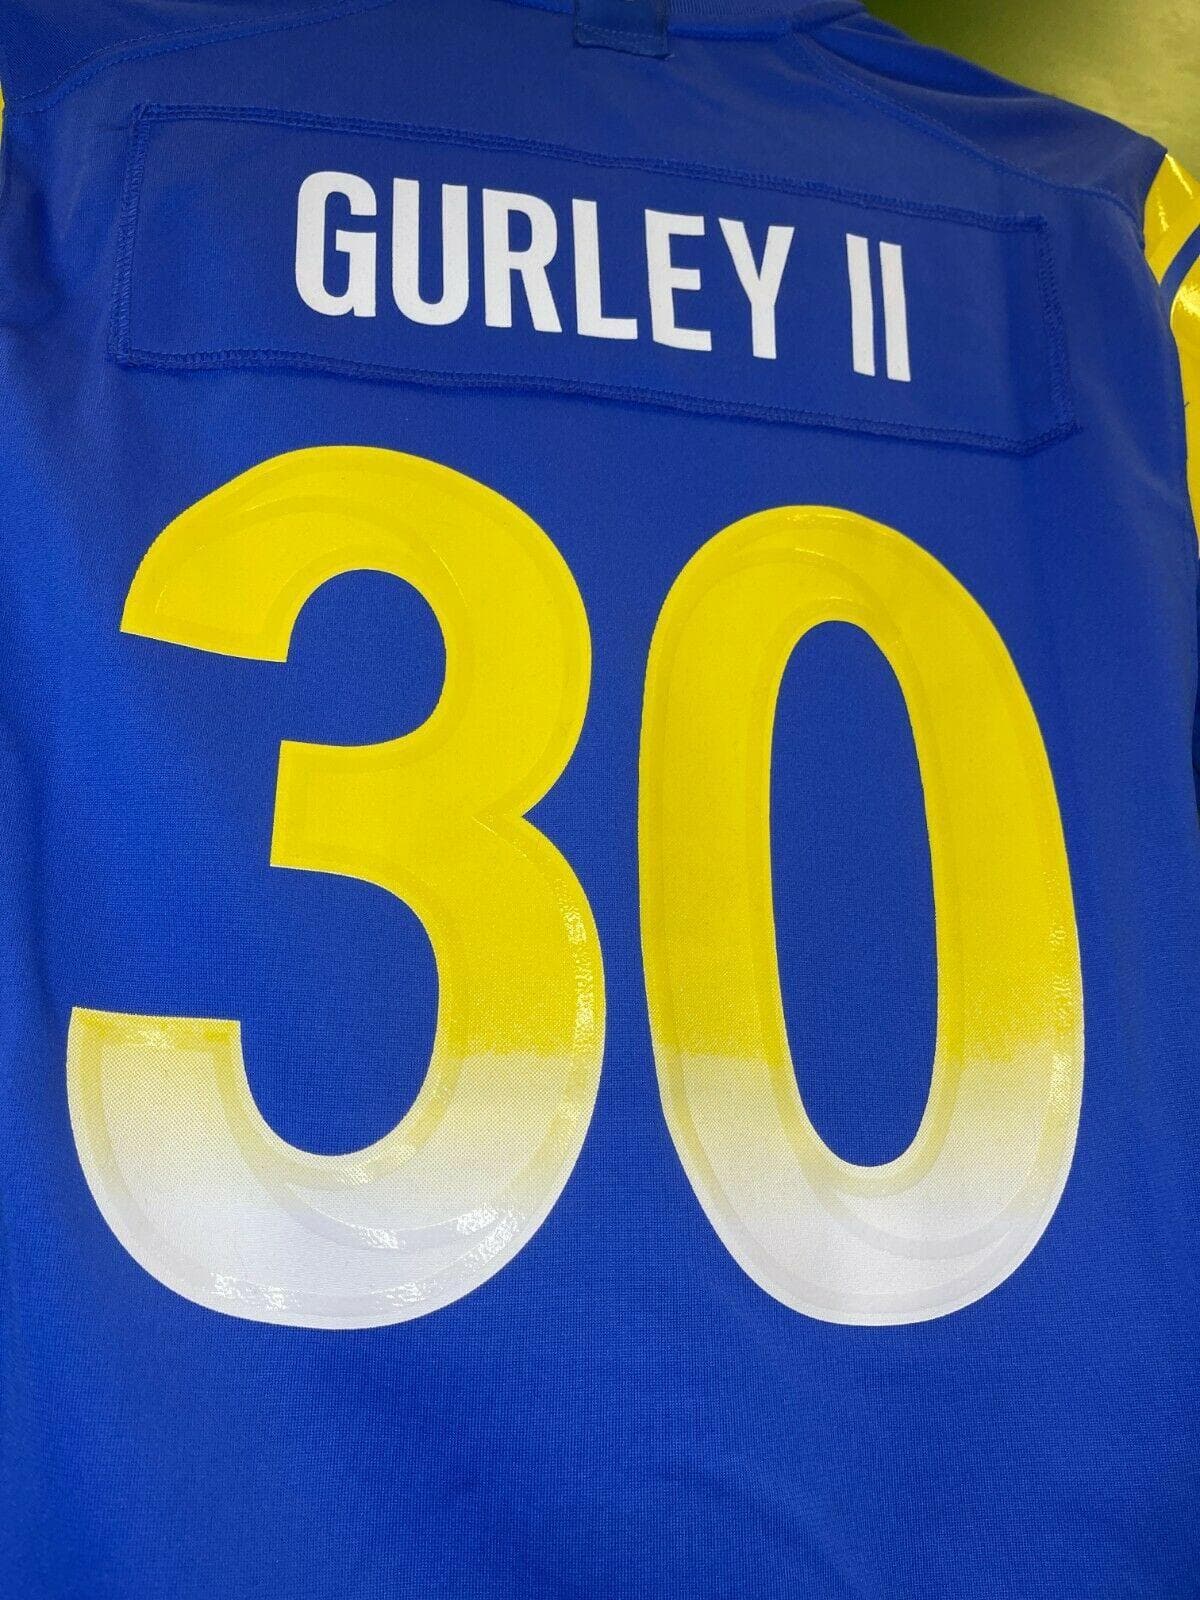 NFL Los Angeles Rams Todd Gurley #30 Game Jersey Youth Medium NWT